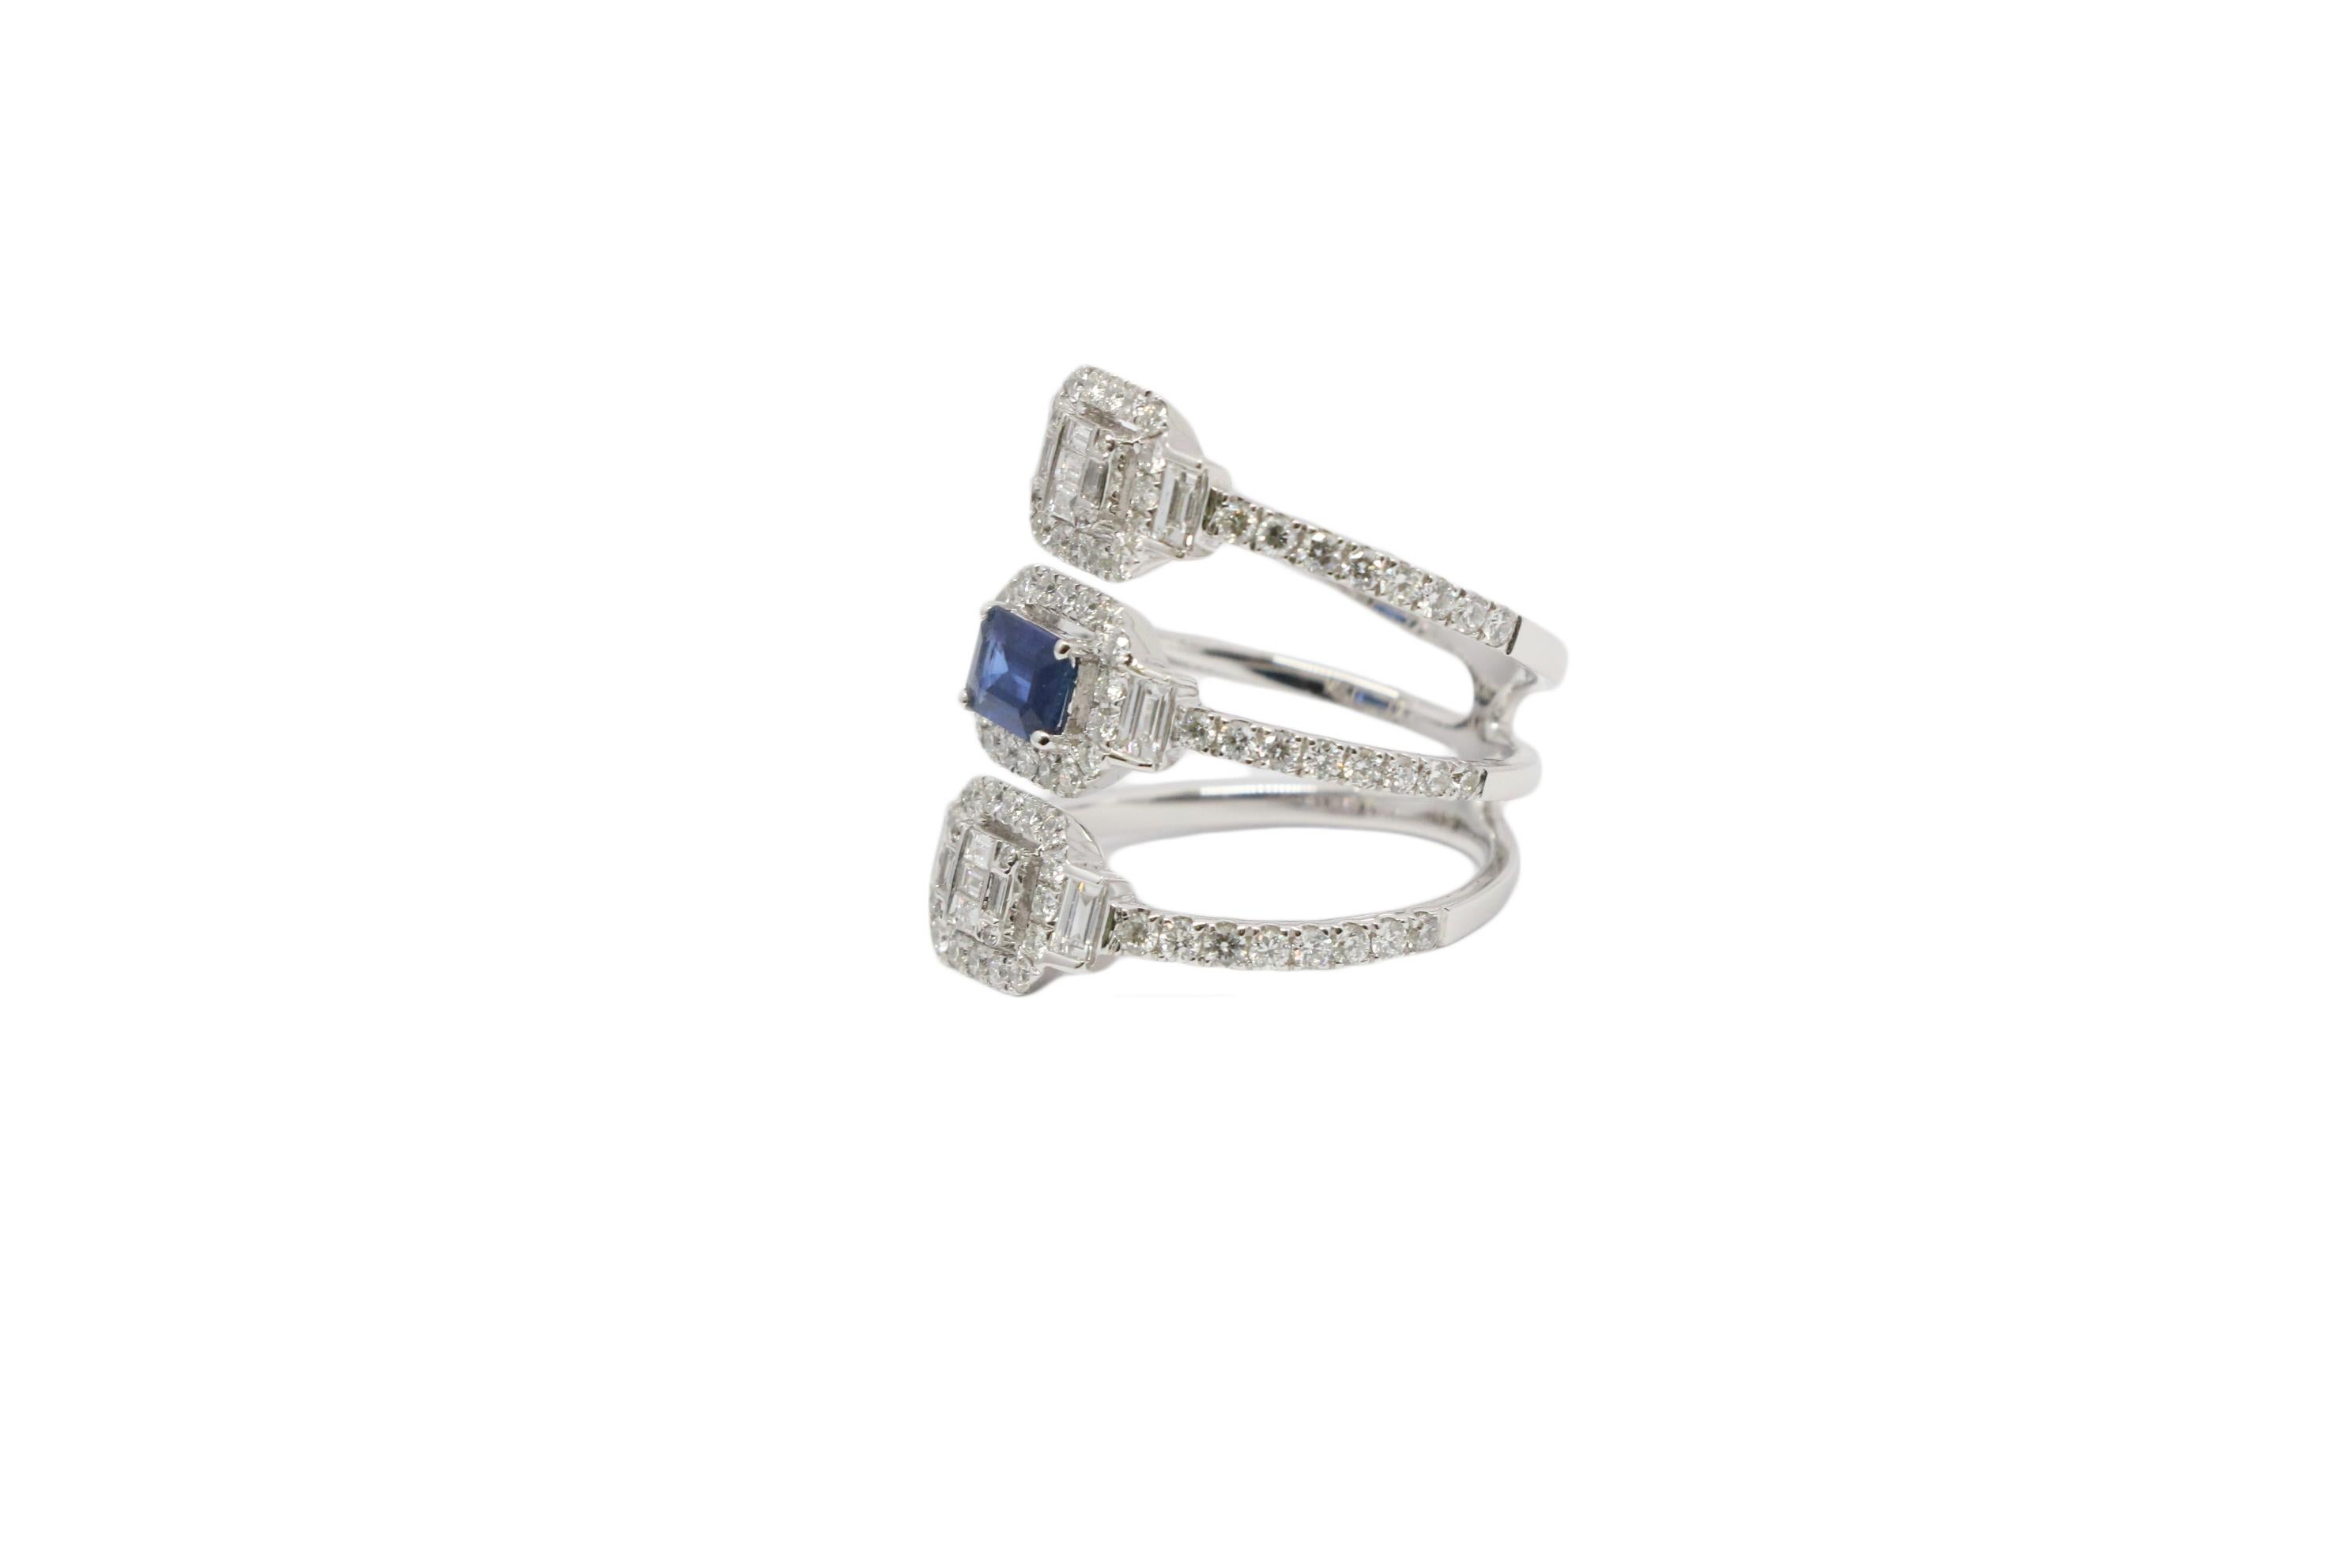 This Ring Has Three 18K White Gold Bands, It Has A Sapphire That Is 0.58 Carats And 1.64 Carats Total Weight Of Round And Baguette Diamonds. 